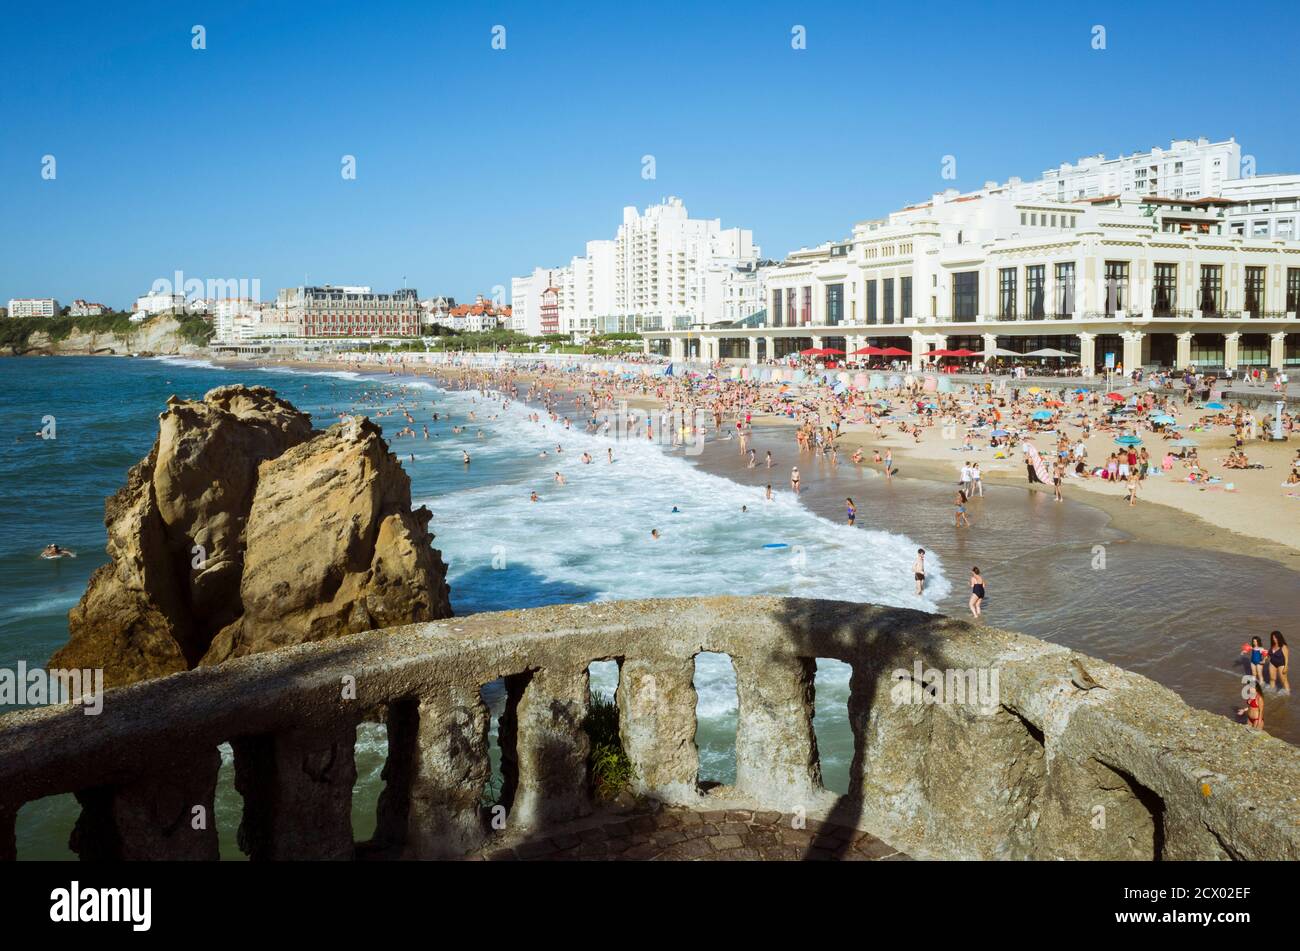 Biarritz, French Basque Country, France - July 19th, 2019 : La Grande Plage, the town's largest beach. Art déco' style Casino of Biarritz and incident Stock Photo